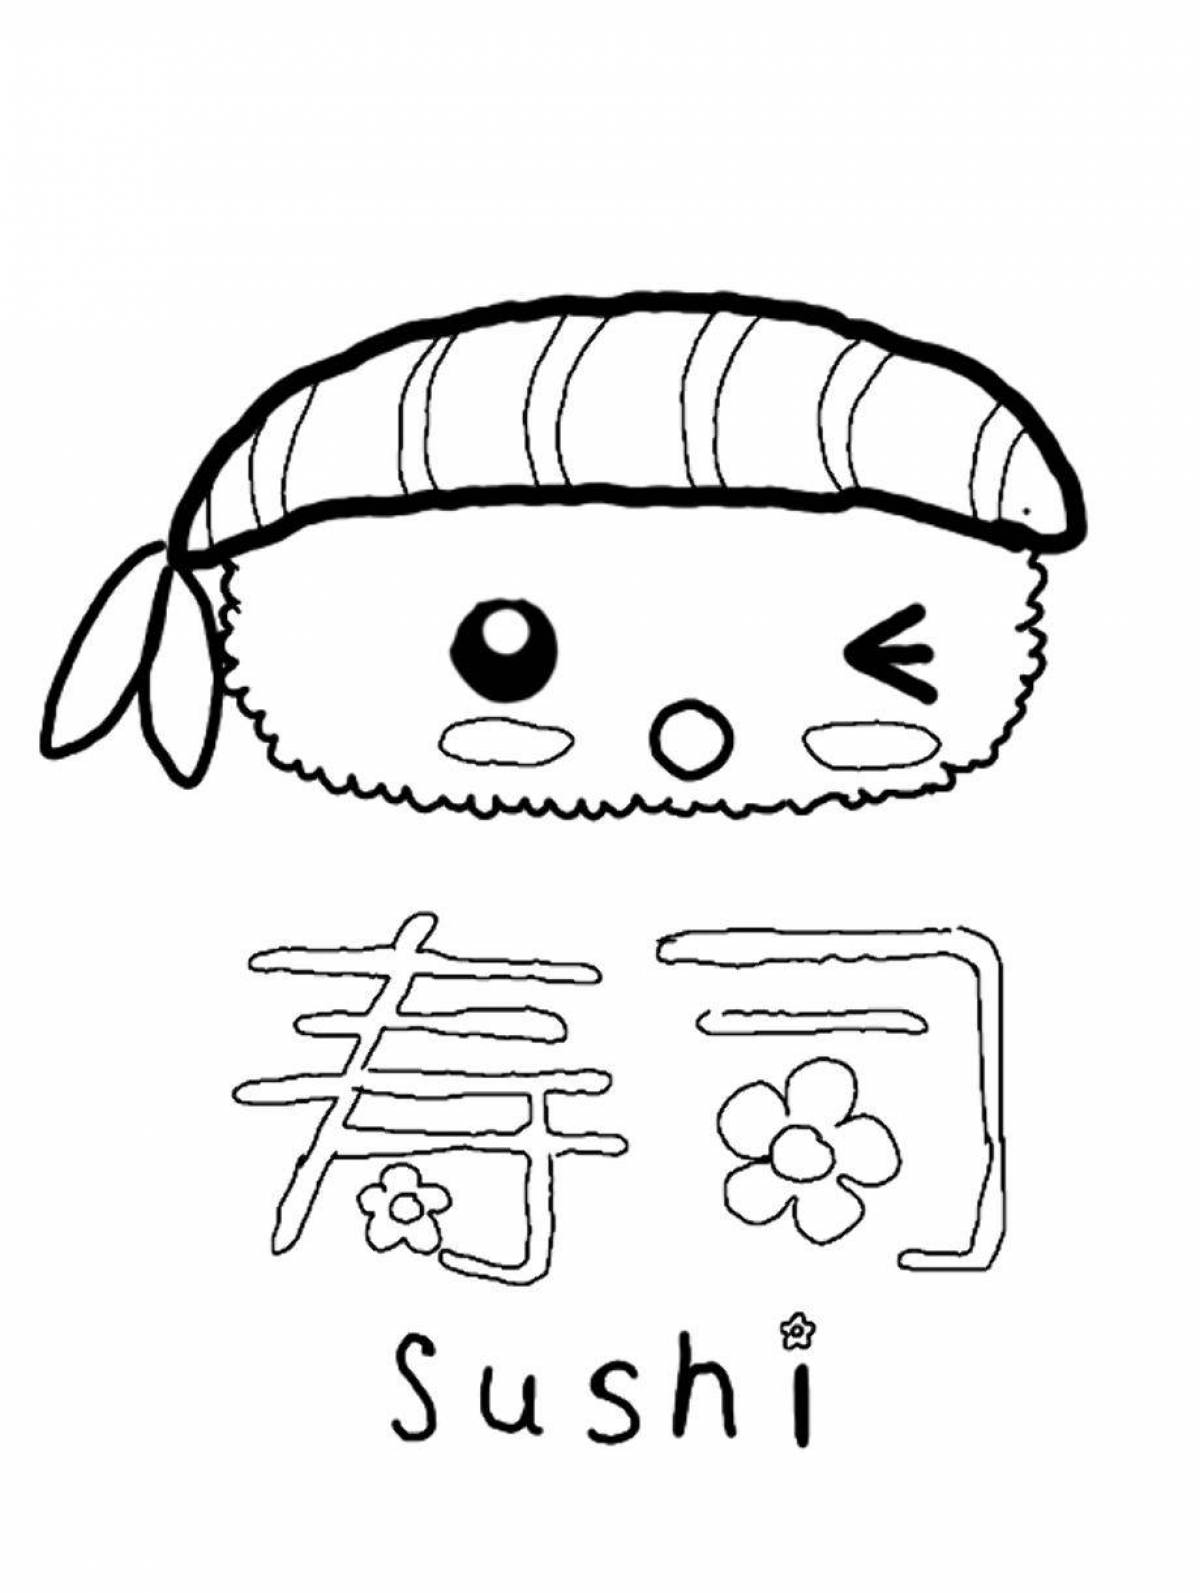 Delightful sushi coloring pages